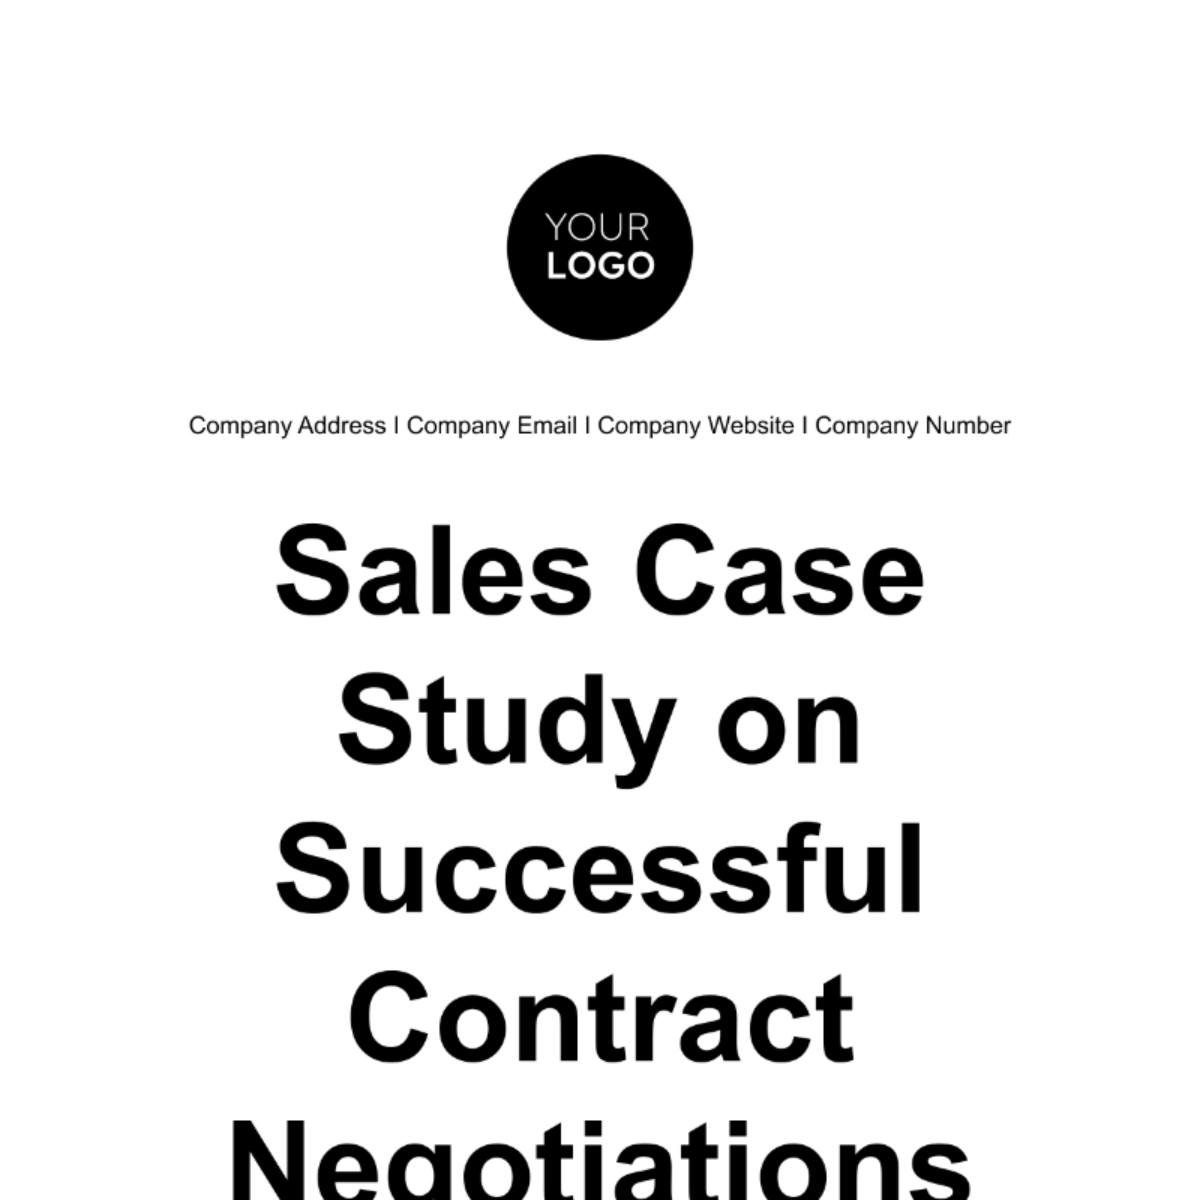 Free Sales Case Study on Successful Contract Negotiations Template